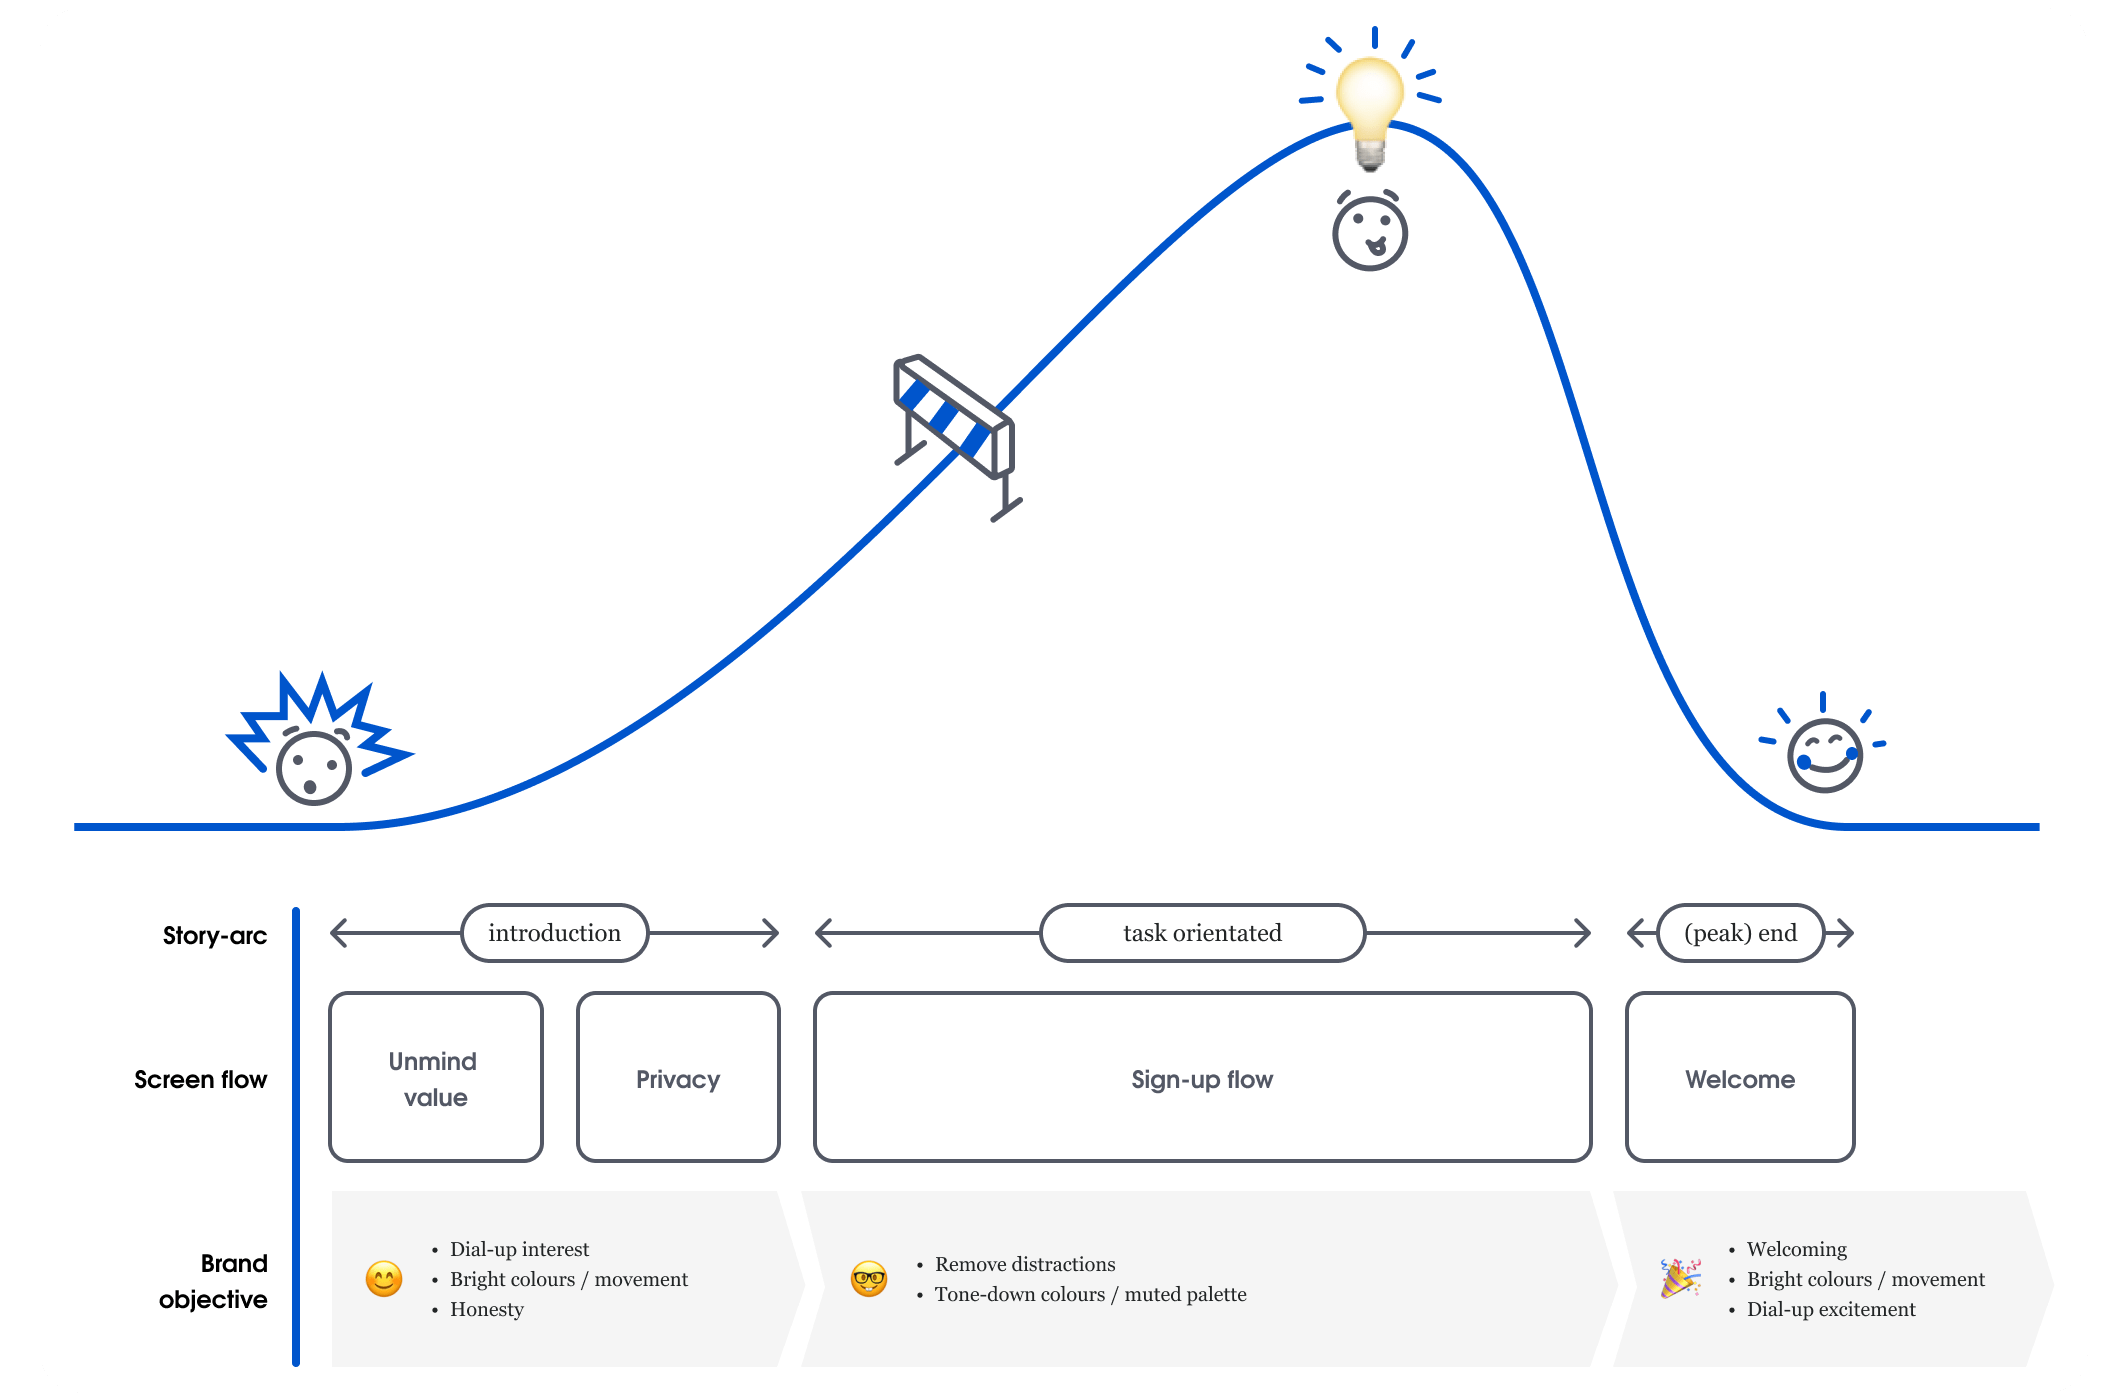 The story arc is split into three phases. The 'introduction' phase starts with an  illustration of an arc slowly bending upwards, there is another illustration of a worried face that conveys a 'Do I trust registering with a mental health app?'. Beneath this are the introductory screens that will show Unmind's value and re-assurance regarding data privacy, and underneath this there are the brand objectives to 'dial up interest, use bright colours and movement, and create an honest feeling in the user'. As the story arc rises we see a hurdle illustration, and the second phase of the story starts — the 'task orientation' phase. This contains the screens where an employee is actually inputting their registration data. The brand objectives here are to 'remove distractions, and tone down the colours'. At this point the story arc illustration reaches it's upper peak, with an illustration of a happy face that seems to convey a 'Wow, that was really easy and answered my concerns!'. At the final 'peak-end' phase the screen flow ends with the welcome screen, and the brand objective is to be 'welcoming, use bright colours and movement, and dial up the excitement'. As the story arc illustration bends down to the starting level there is an illustration of a beaming face that conveys a 'I can't wait to see what is to come!'